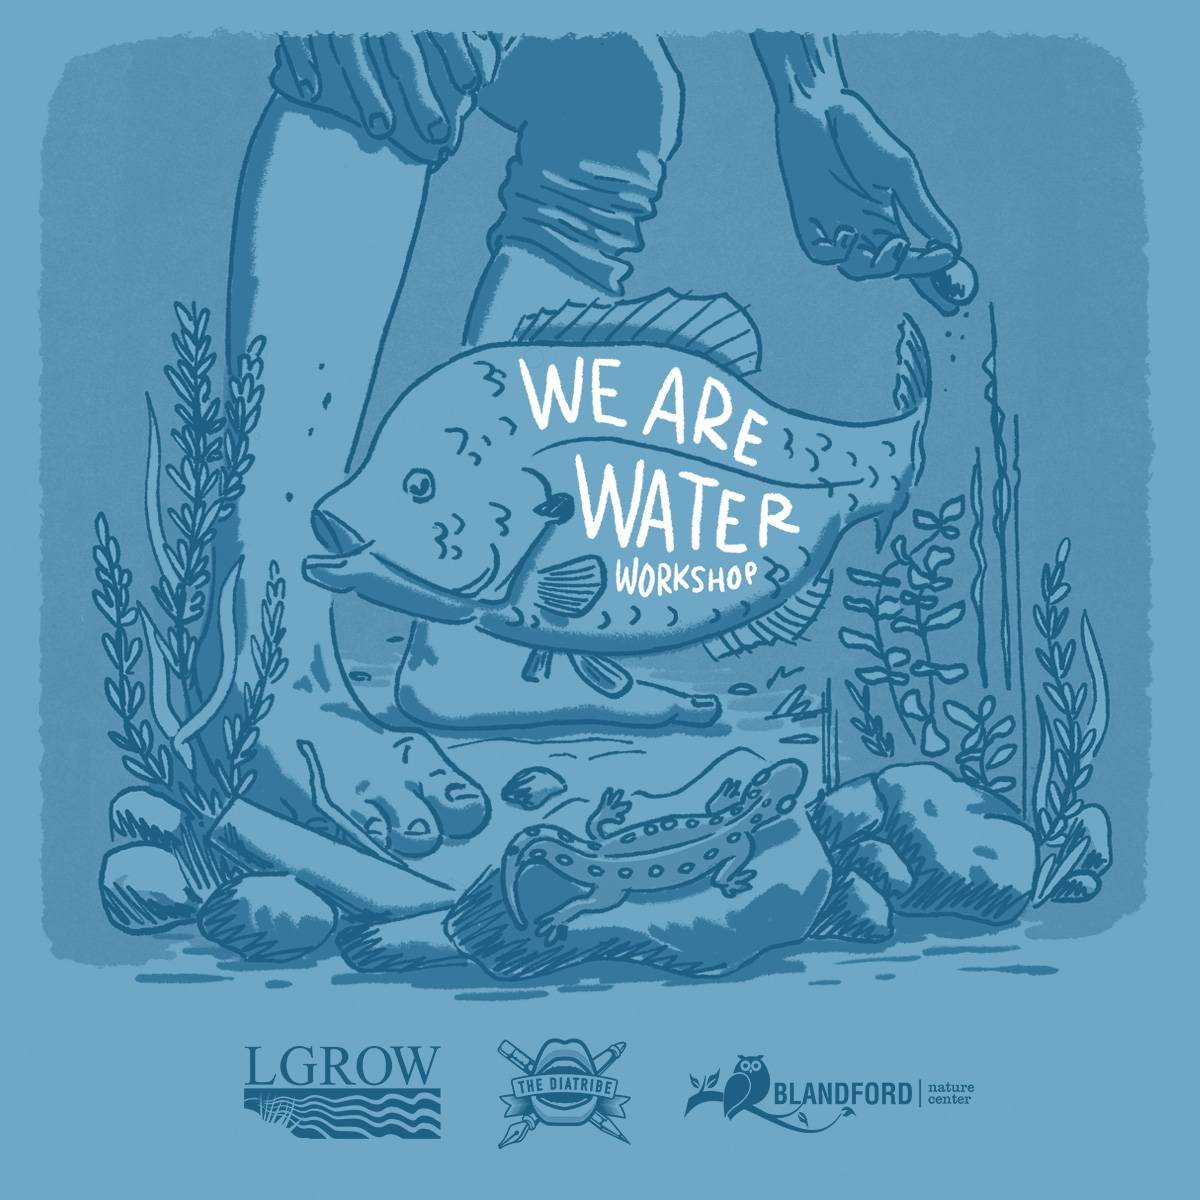 We Are Water Workshop